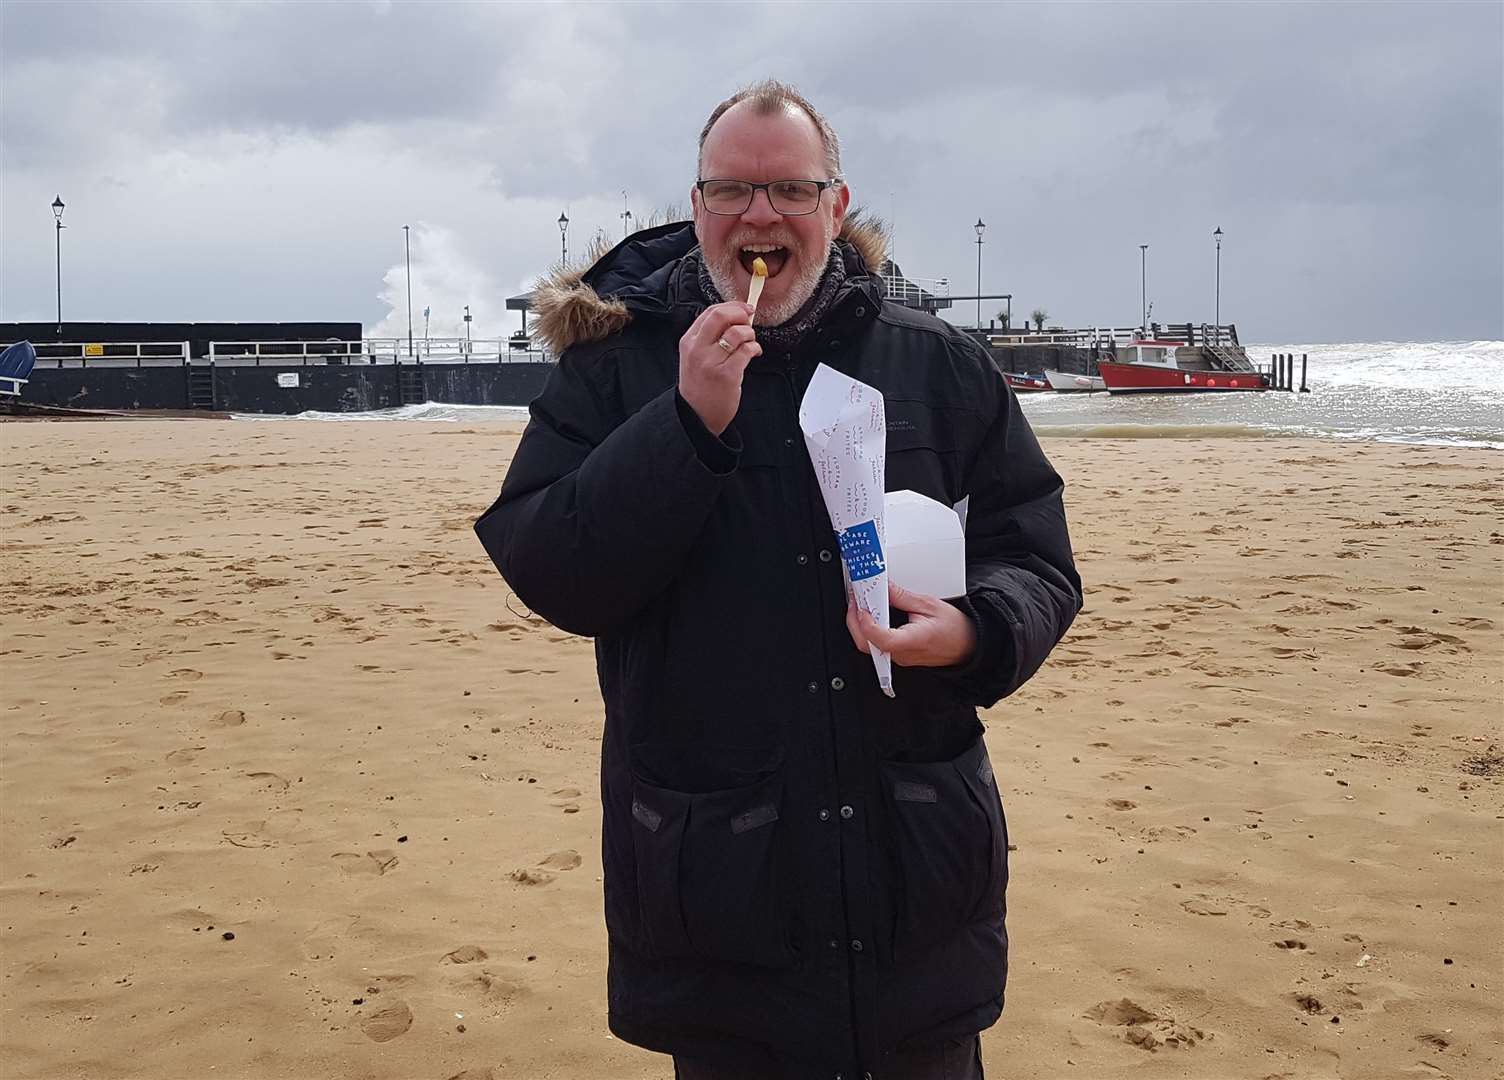 Your reviewer braves the elements (kindly note waves crashing on sea wall behind) to eat some chips